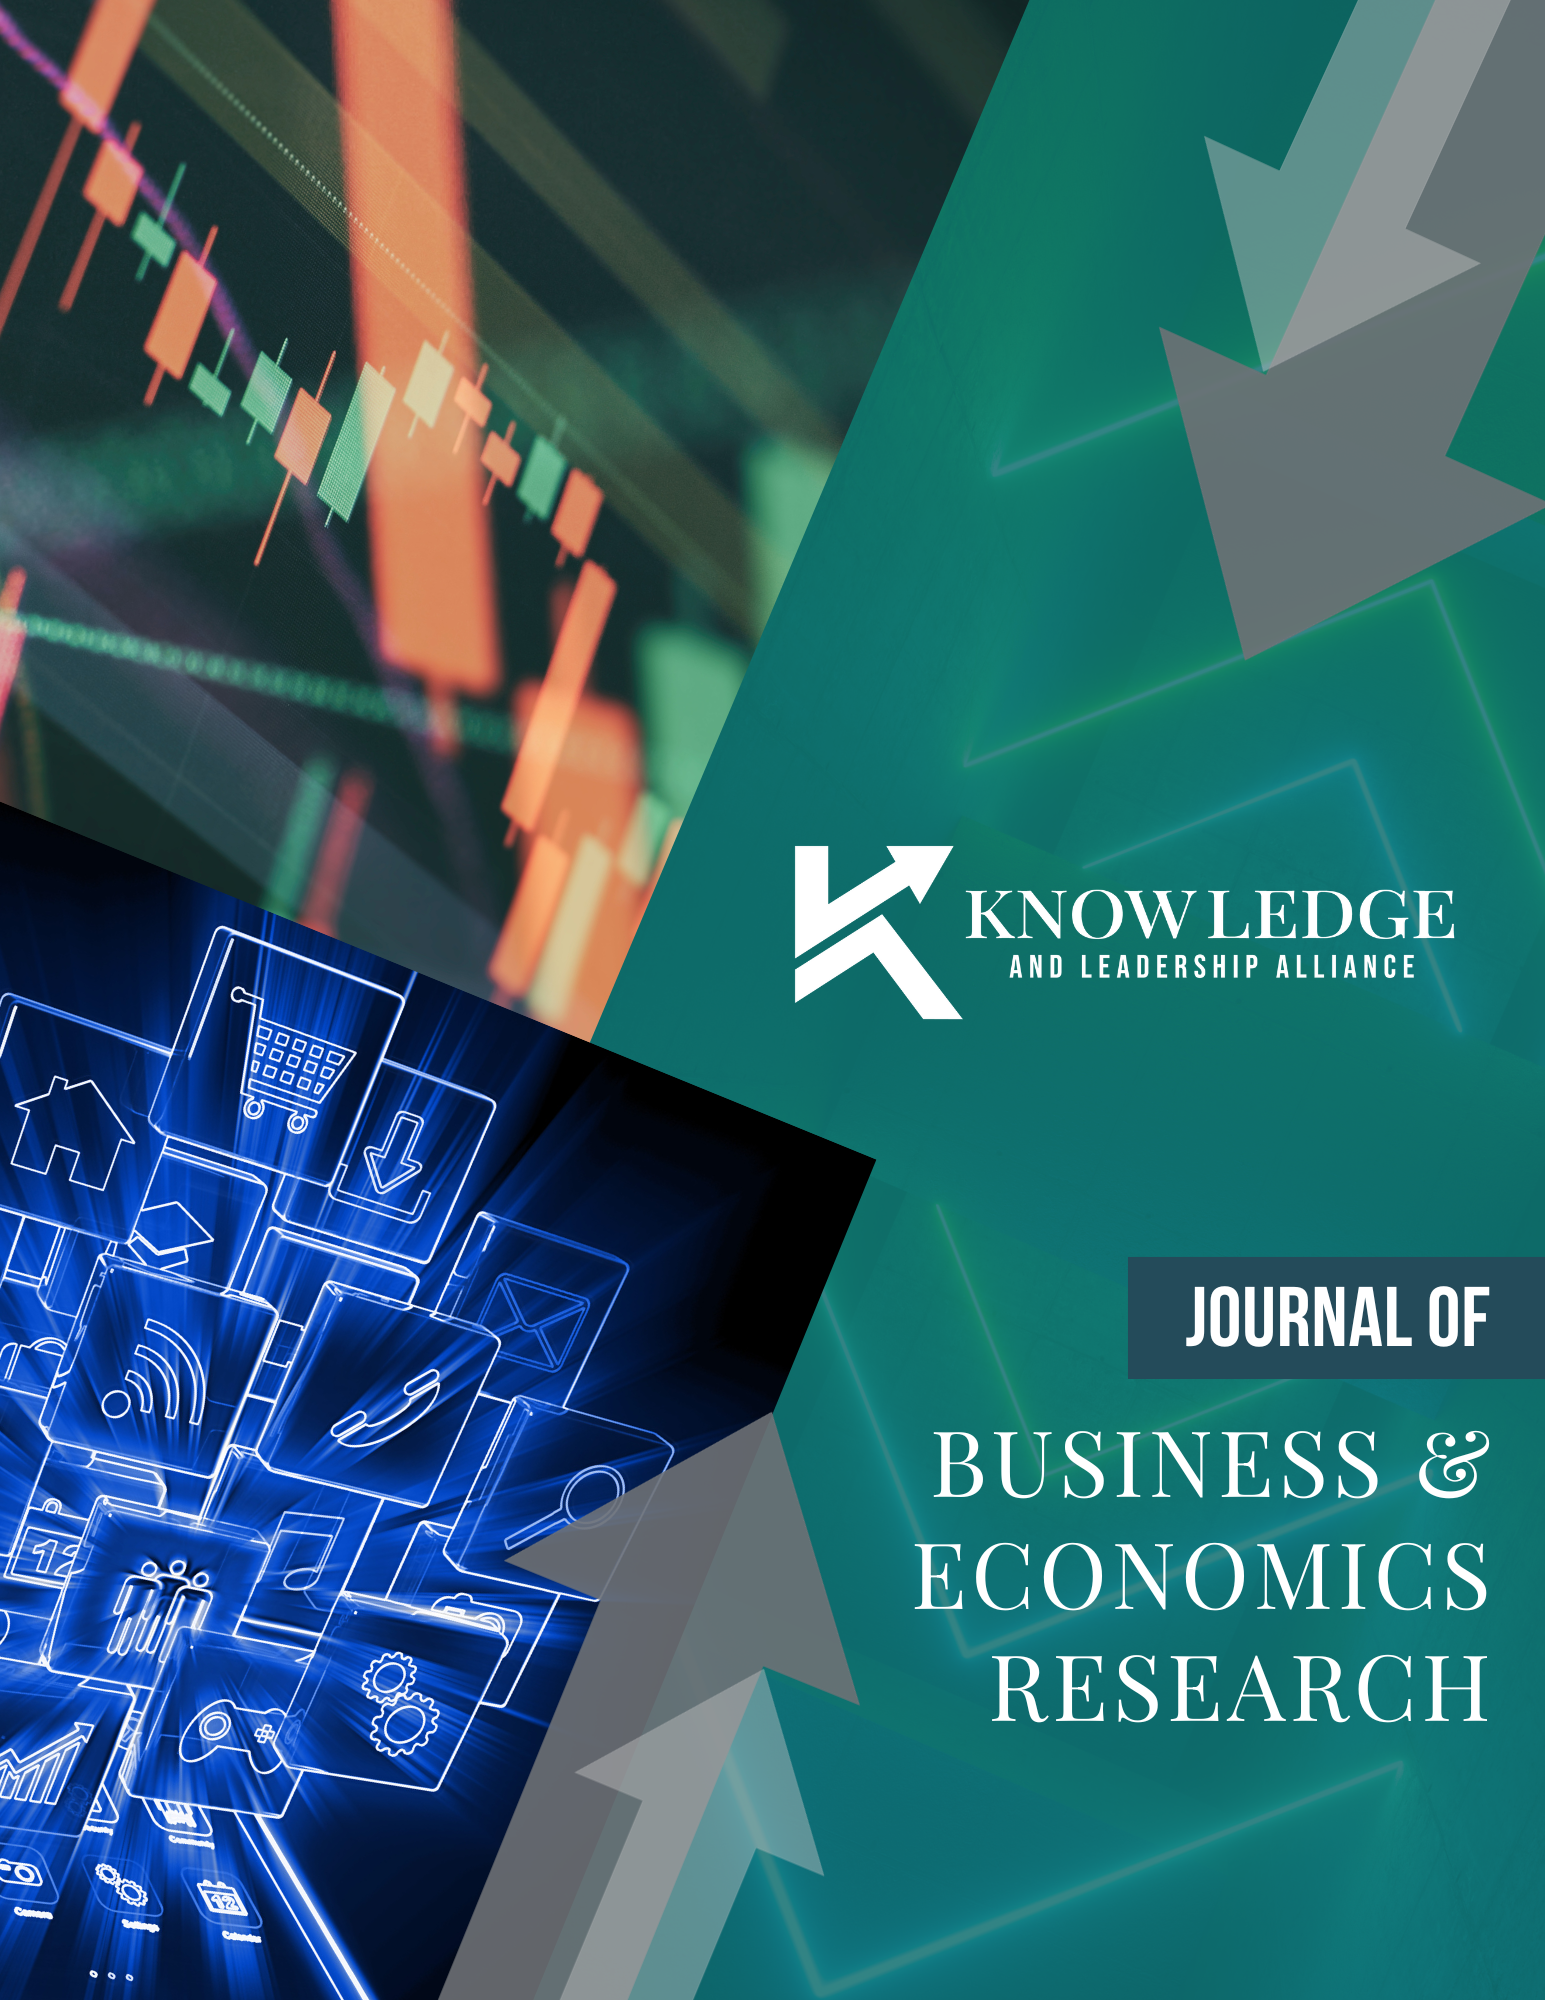 Journal of Business & Economics Research